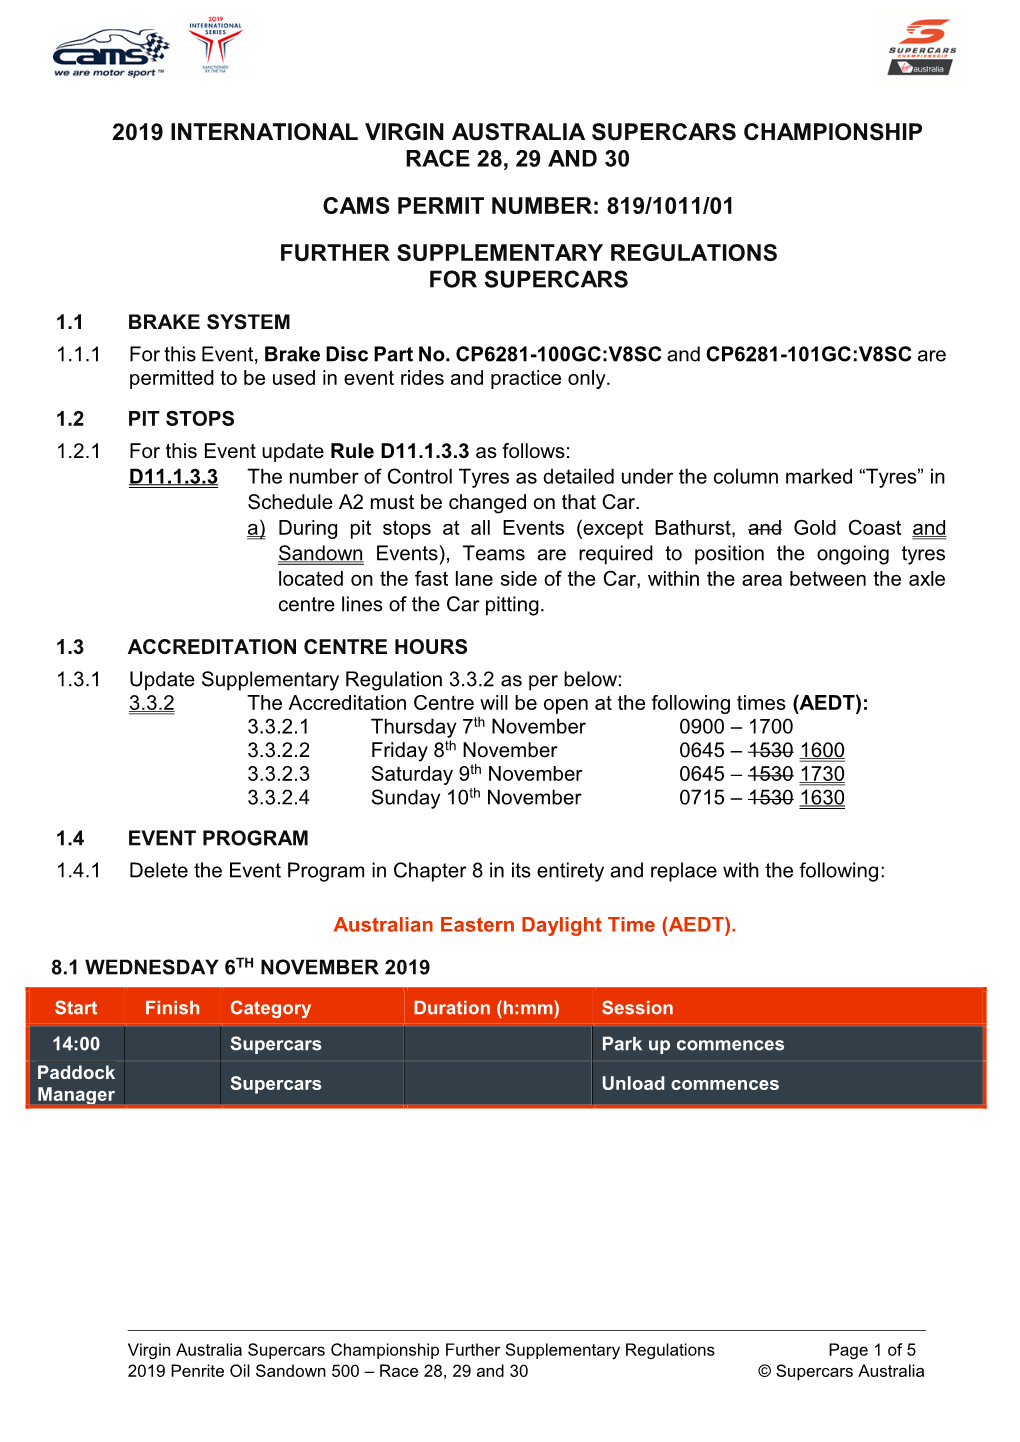 Further Supplementary Regulations for Supercars